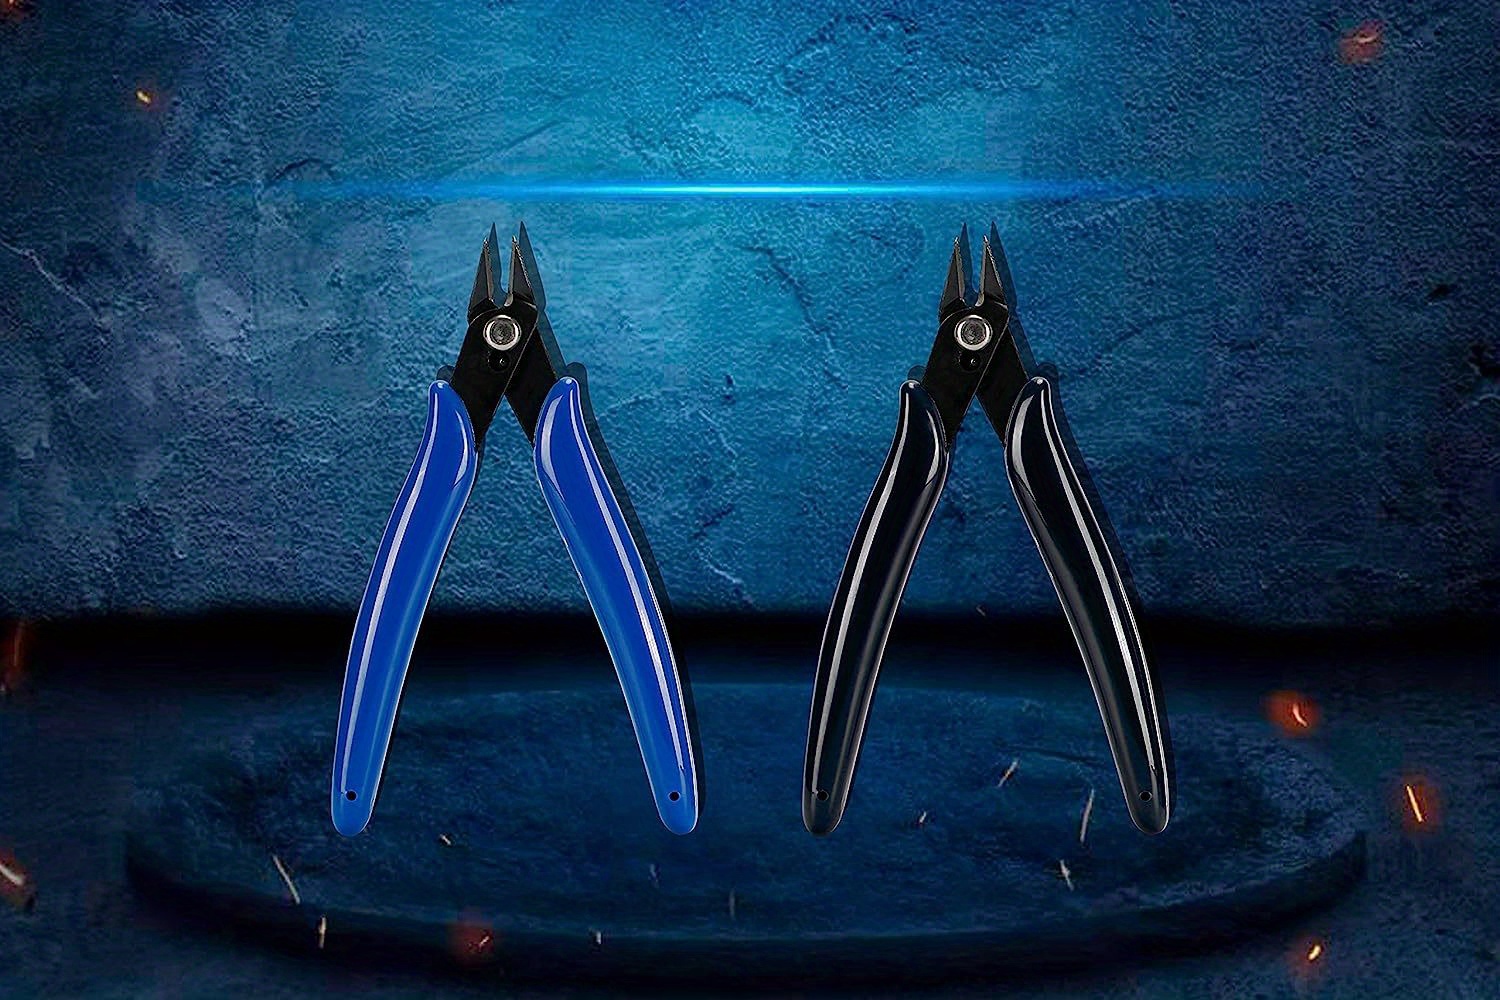 1.93 95Mm Mini Side Wire Cutters Pliers Cutting Tool Jewellery Crafts  Beading Work tooltime